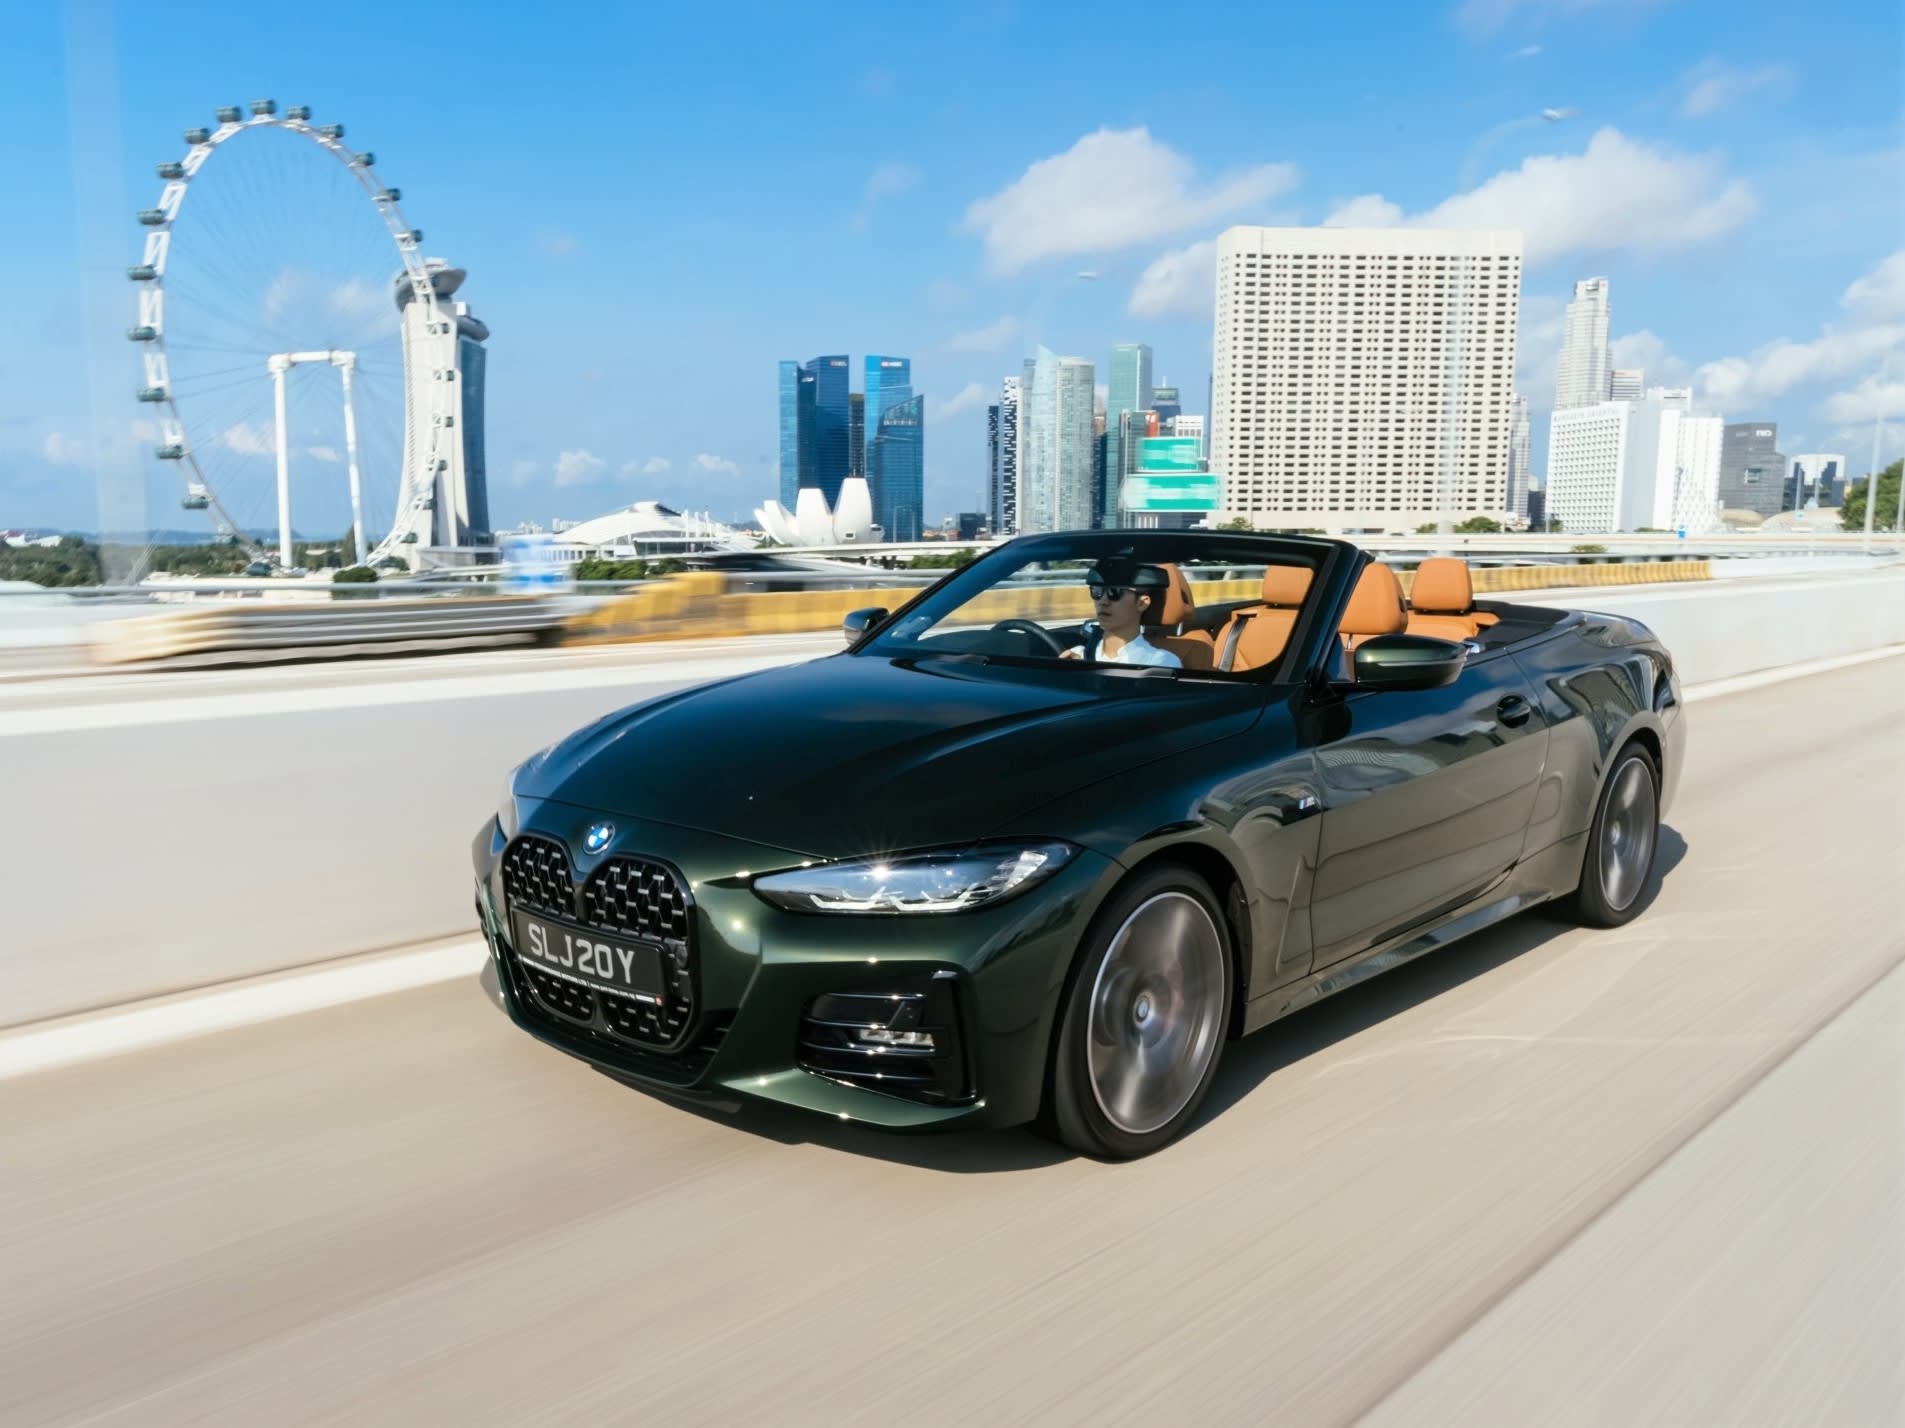 The new BMW 4 Series Convertible takes top-down motoring back to the future